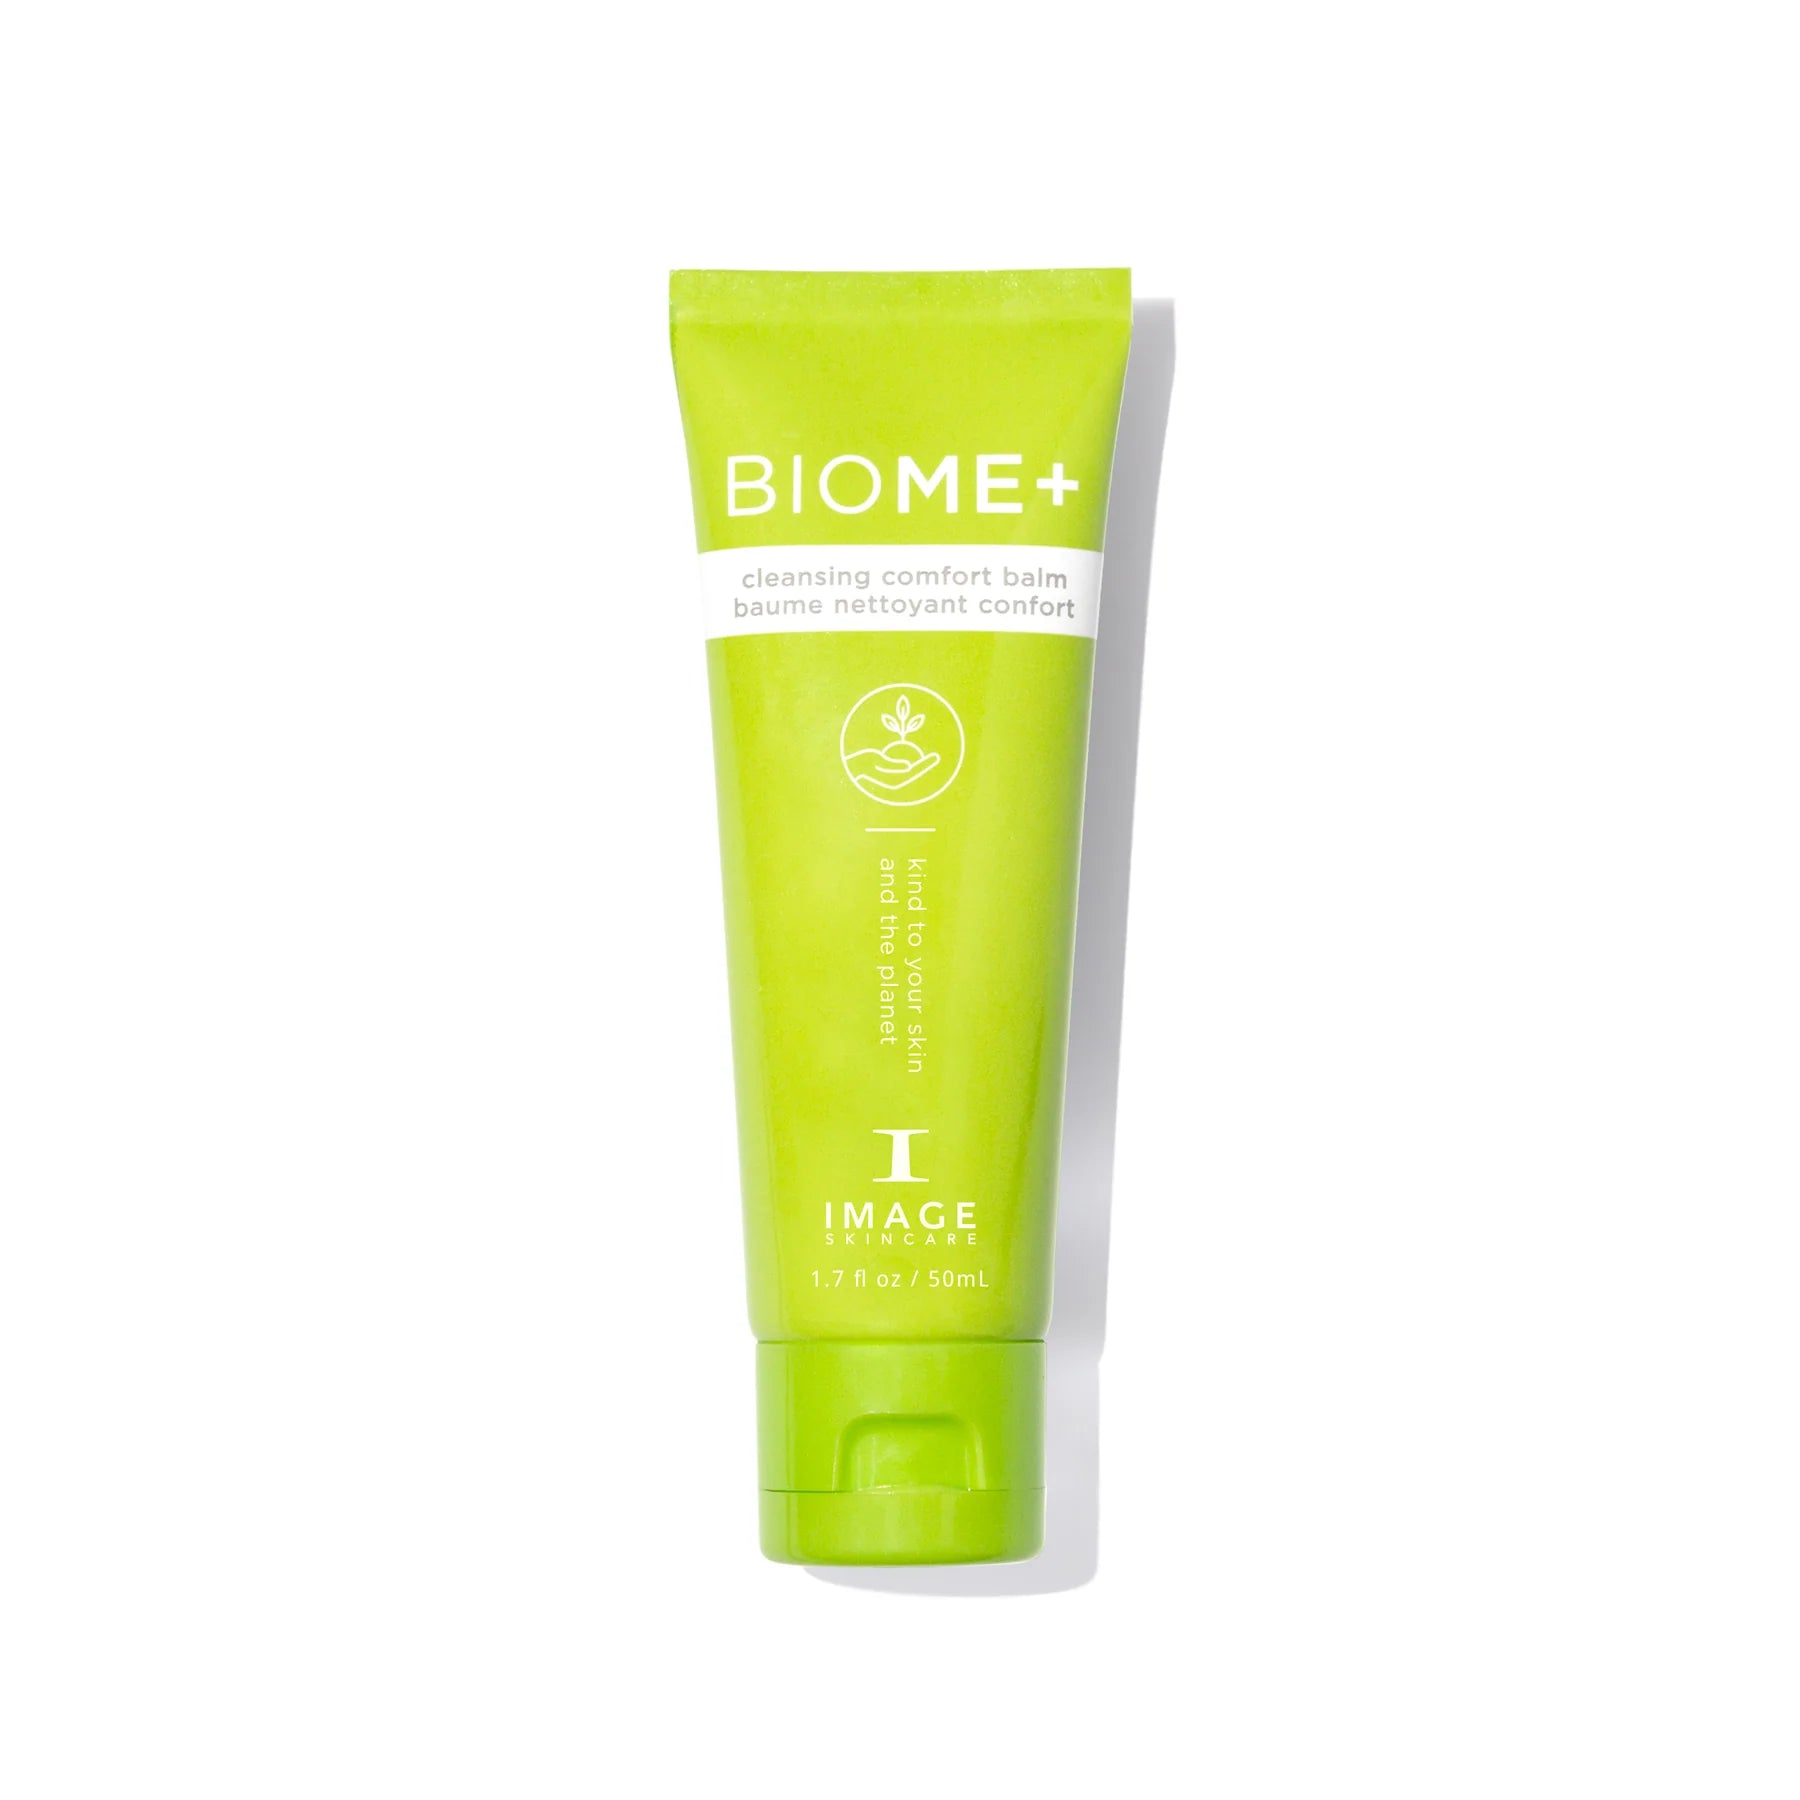 BIOME+ Cleansing Balm